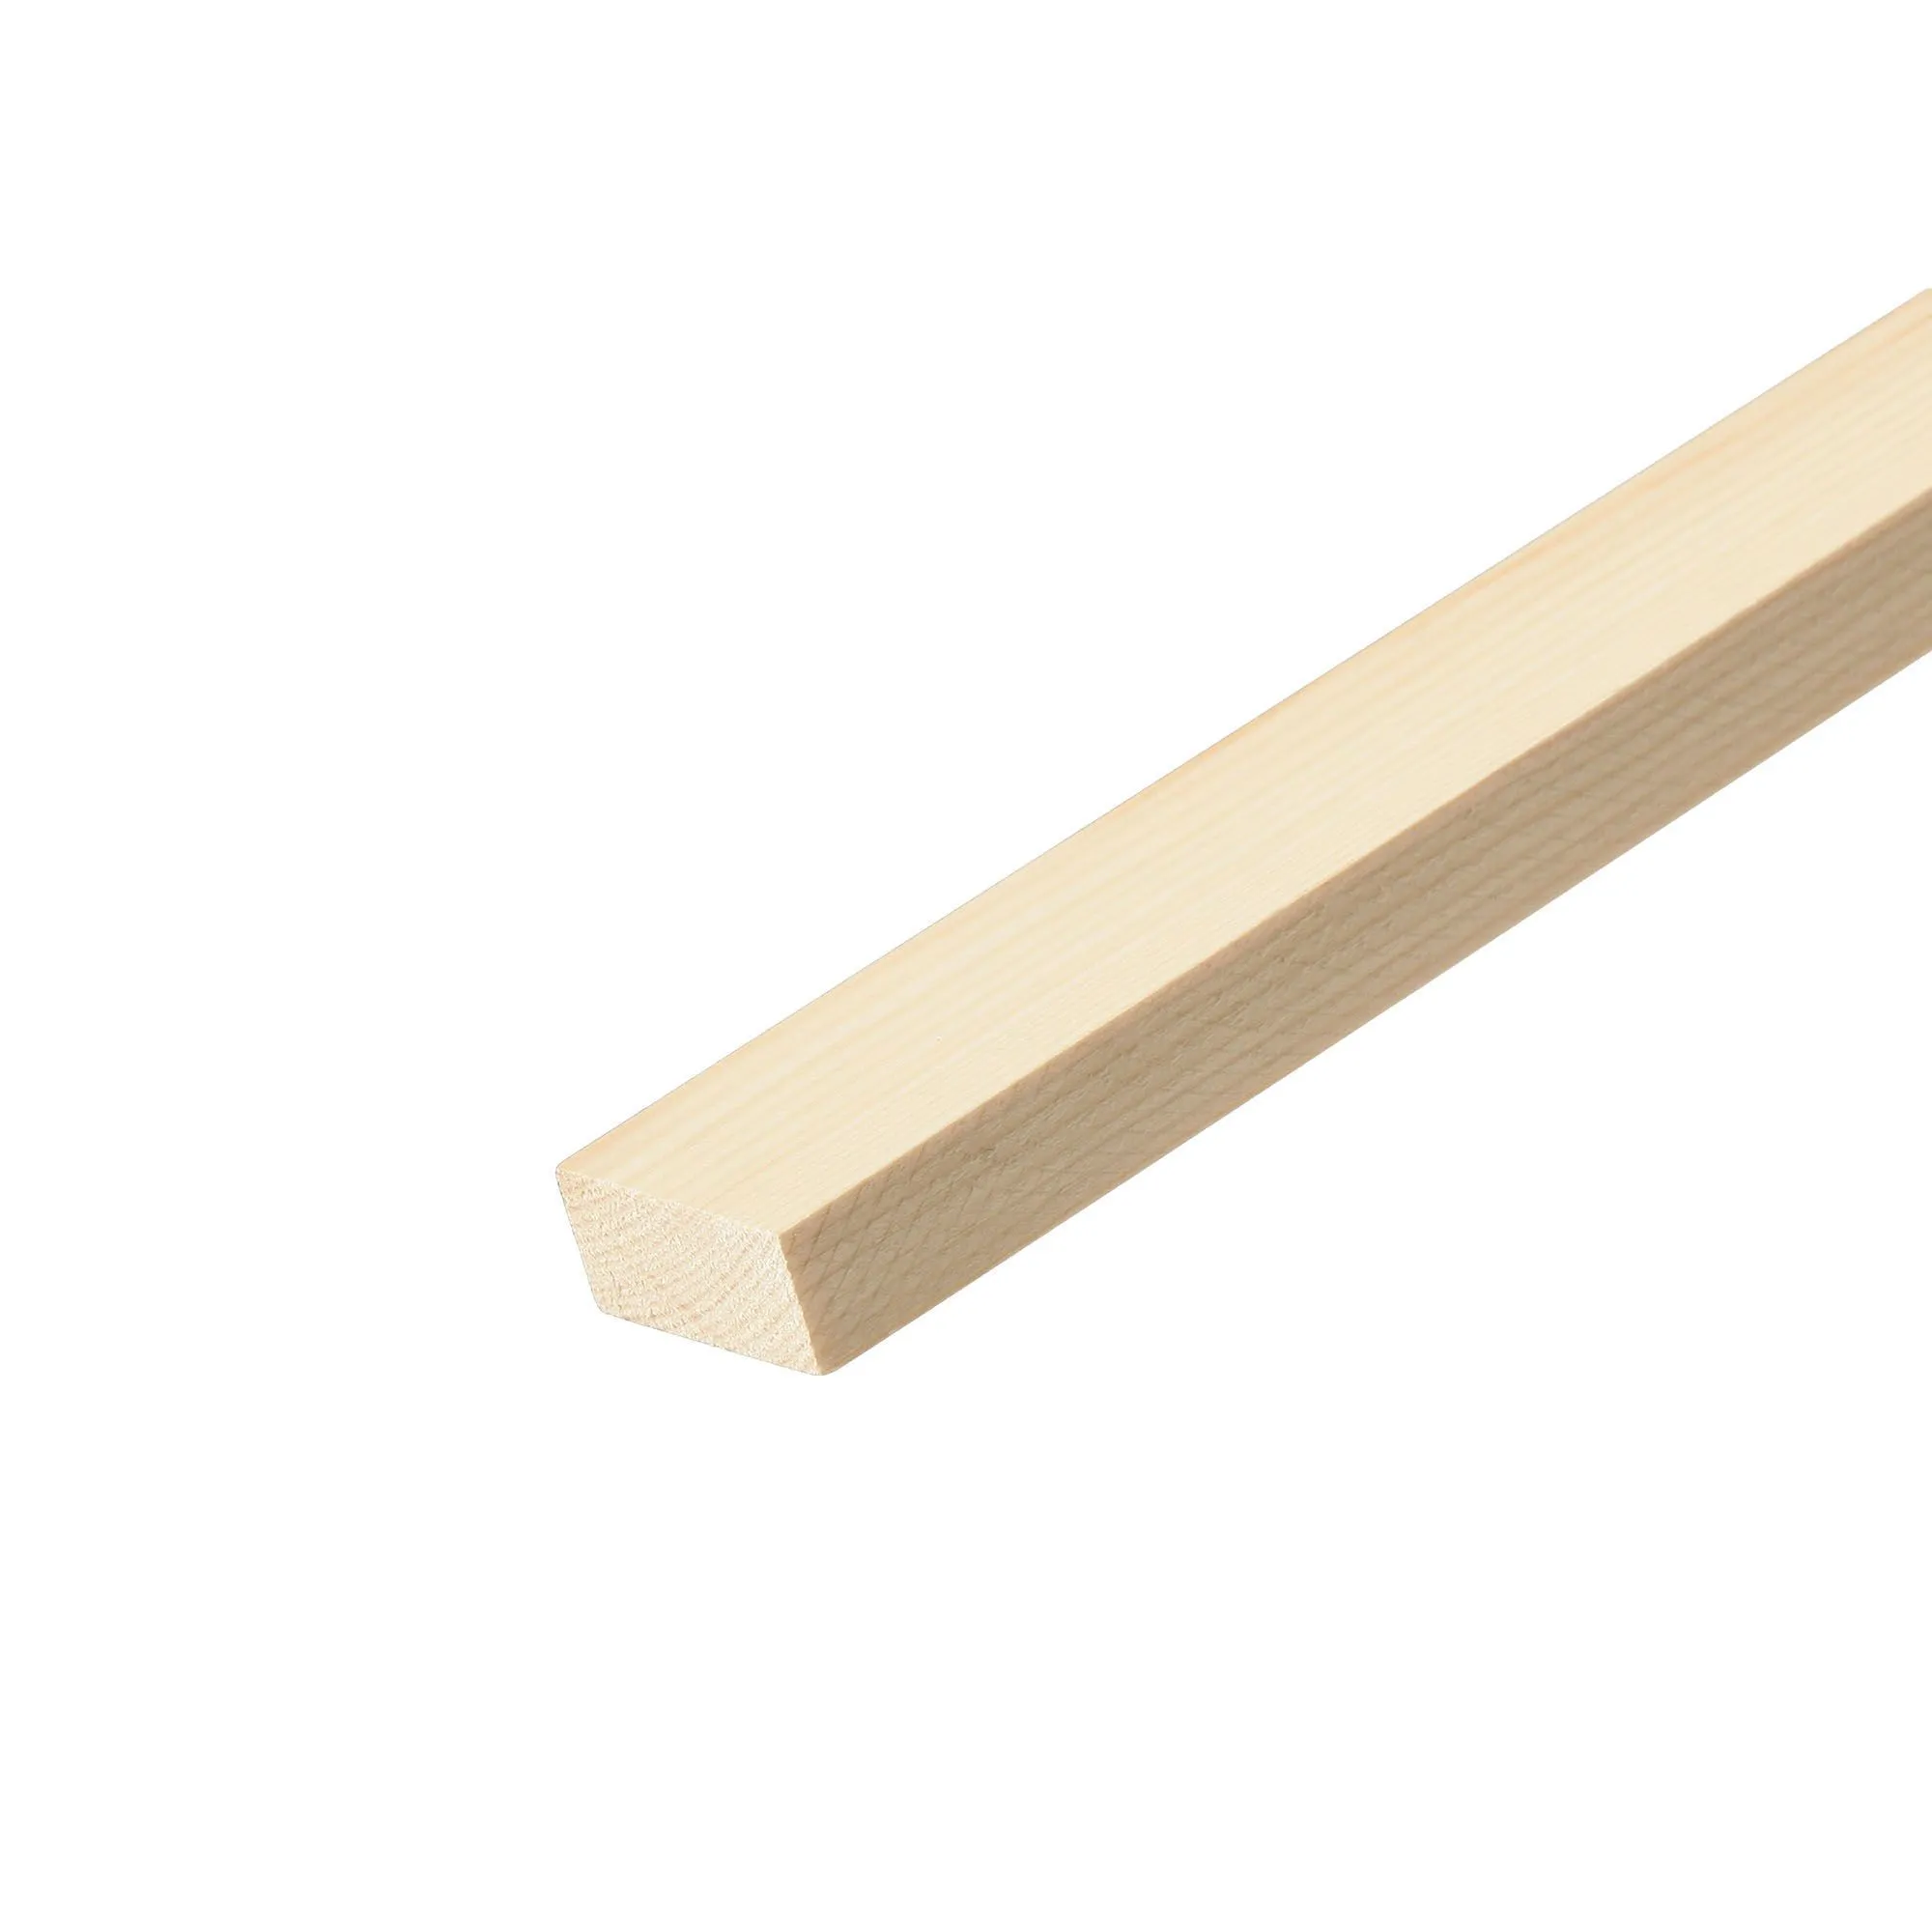 Cheshire Mouldings Smooth Square edge Pine Stripwood (L)0.9m (W)36mm (T)25mm